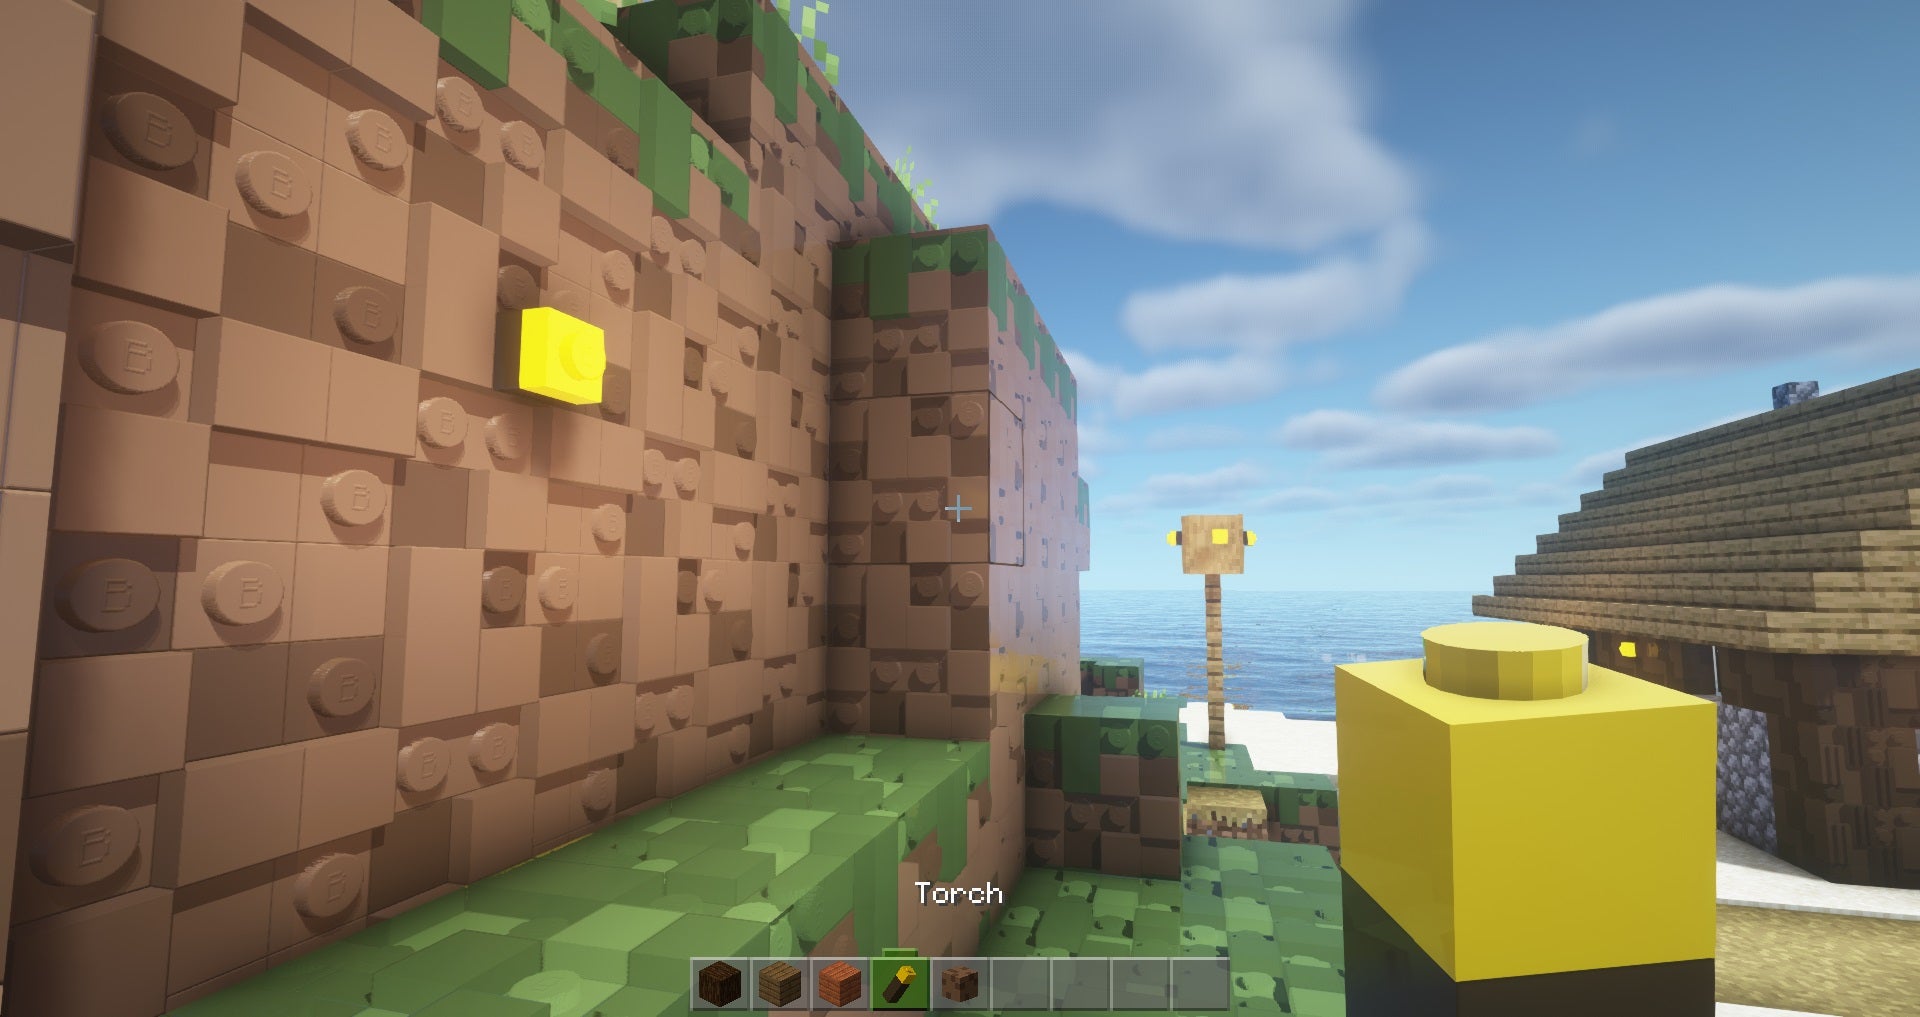 Brixel resource pack for Minecraft - A screenshot of a player holding a Lego-like torch while looking at a dirt cliff that also appears made of Lego-style bricks.